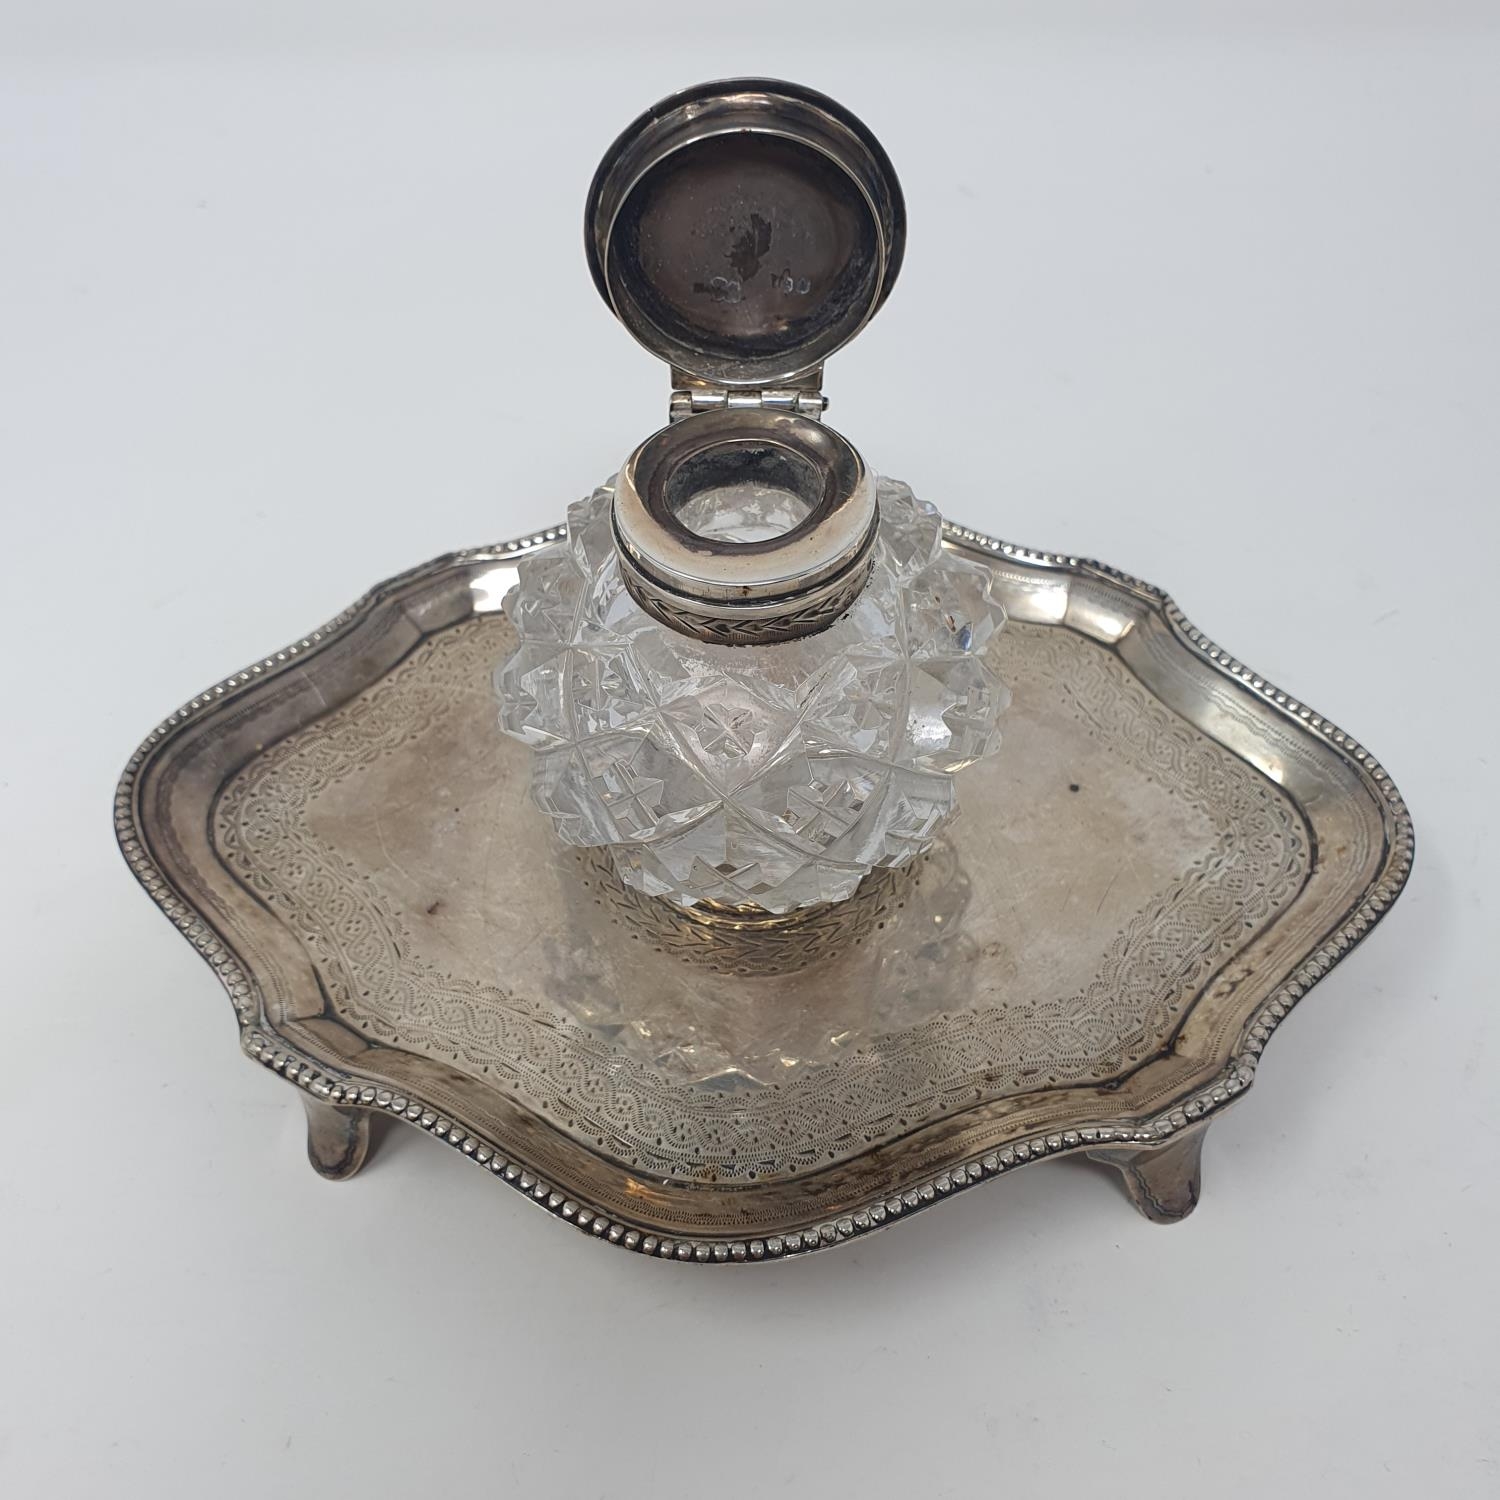 An early 19th century silver inkstand, glass a inkwell, London 1832 Overall condition good, some - Image 4 of 5